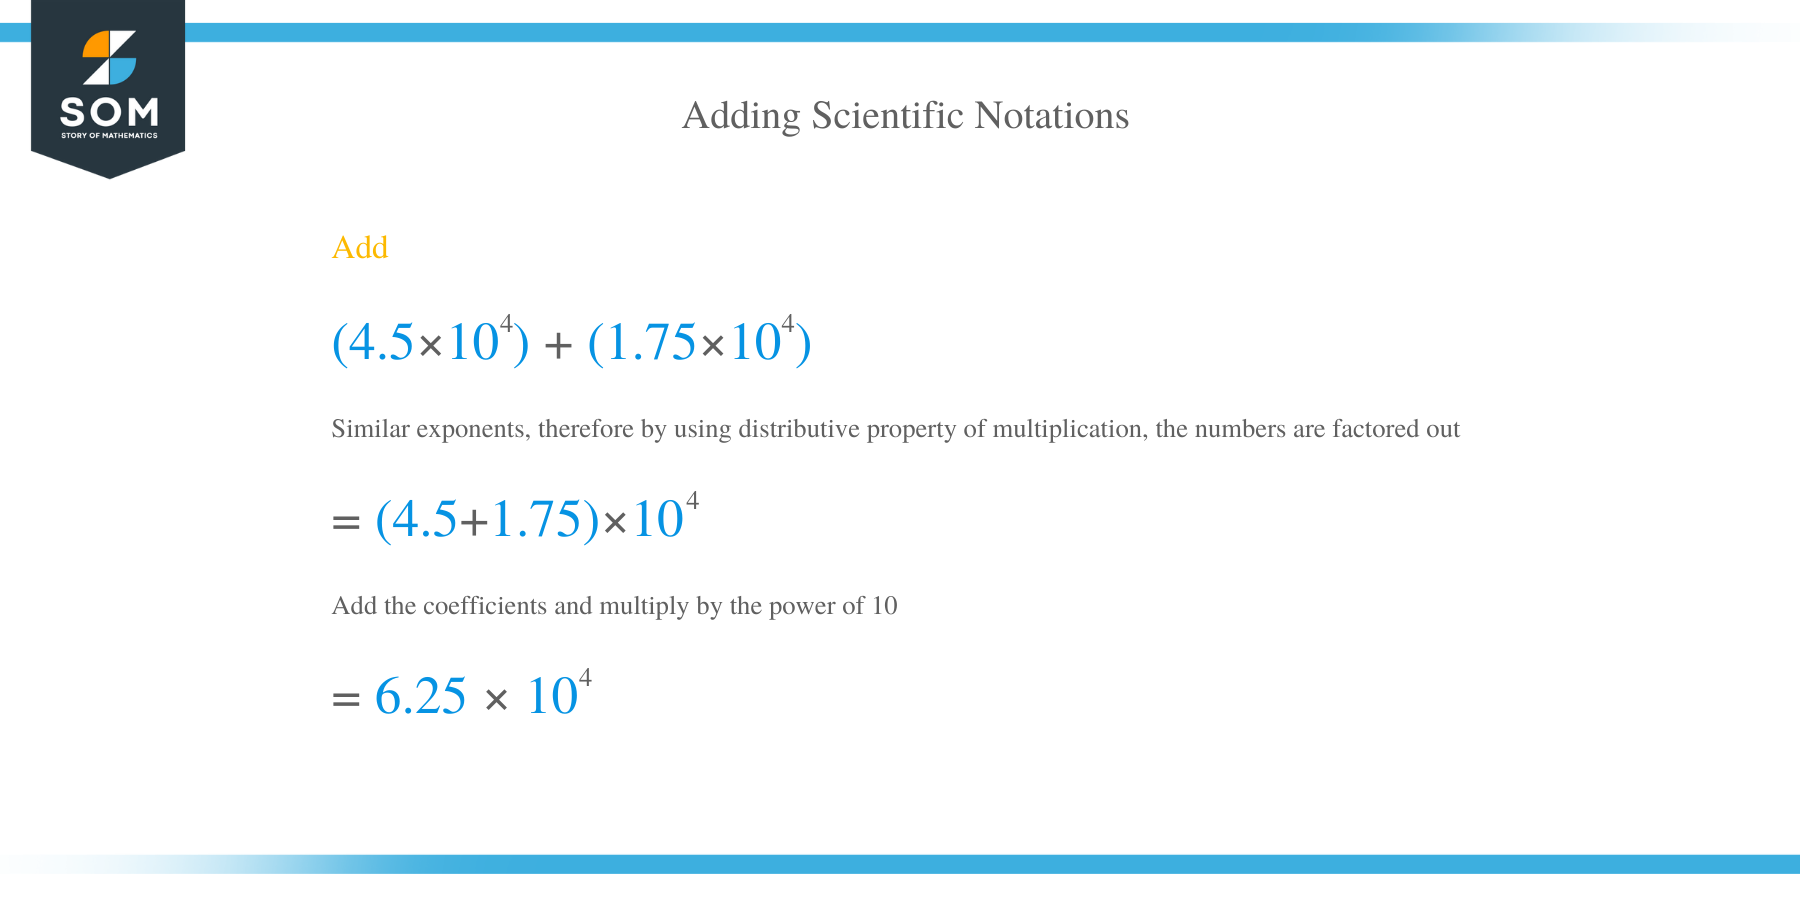 How to Add in Scientific Notation?